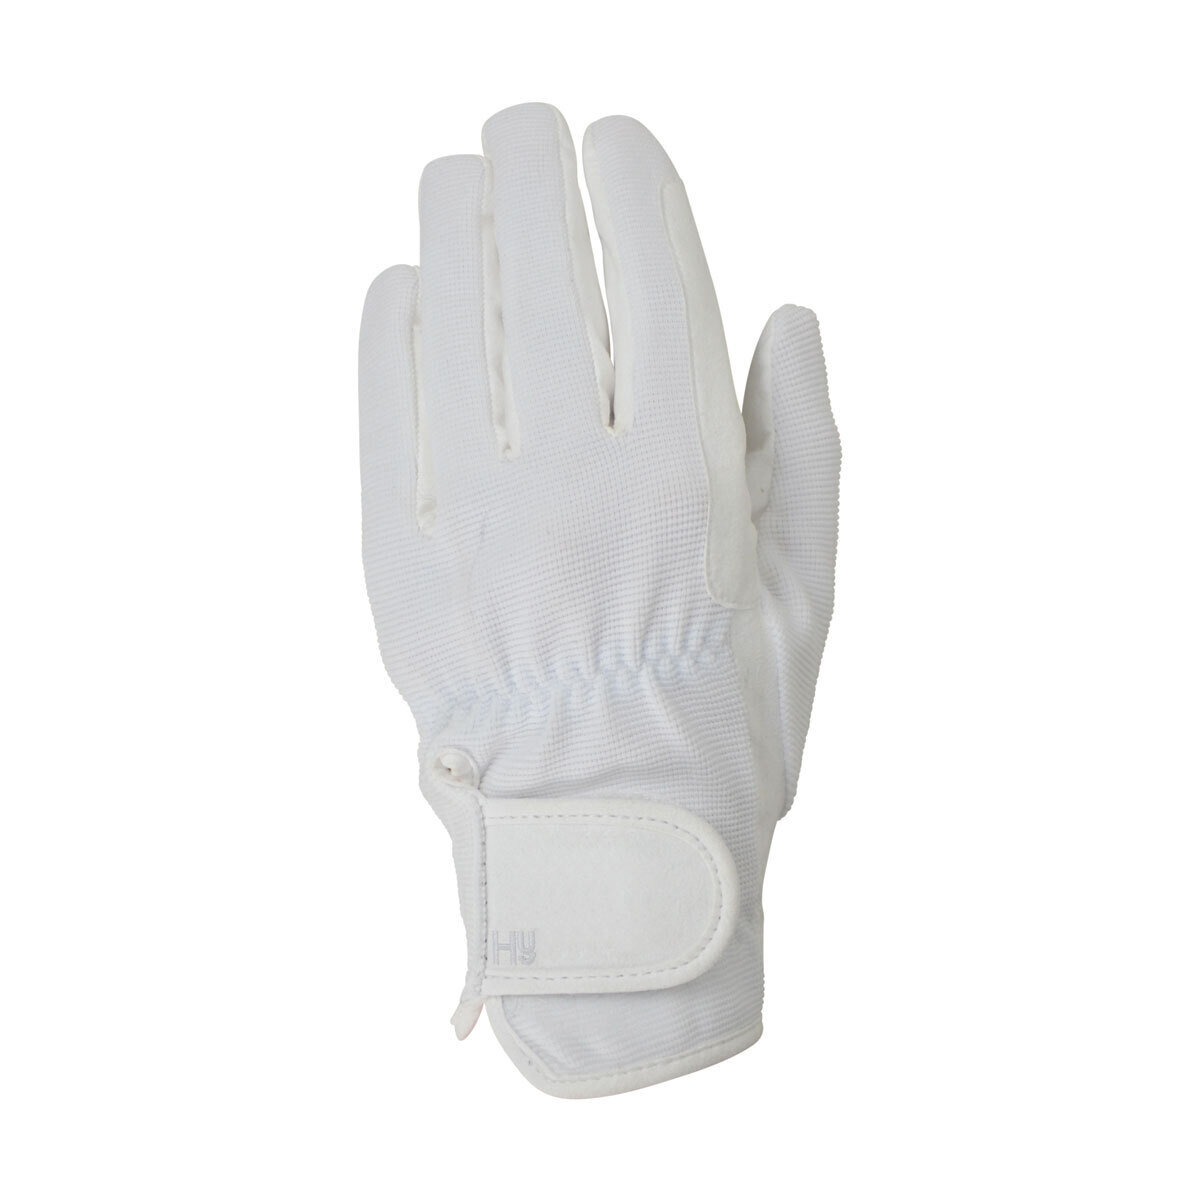 Hy5 Every Day Leather Riding Gloves